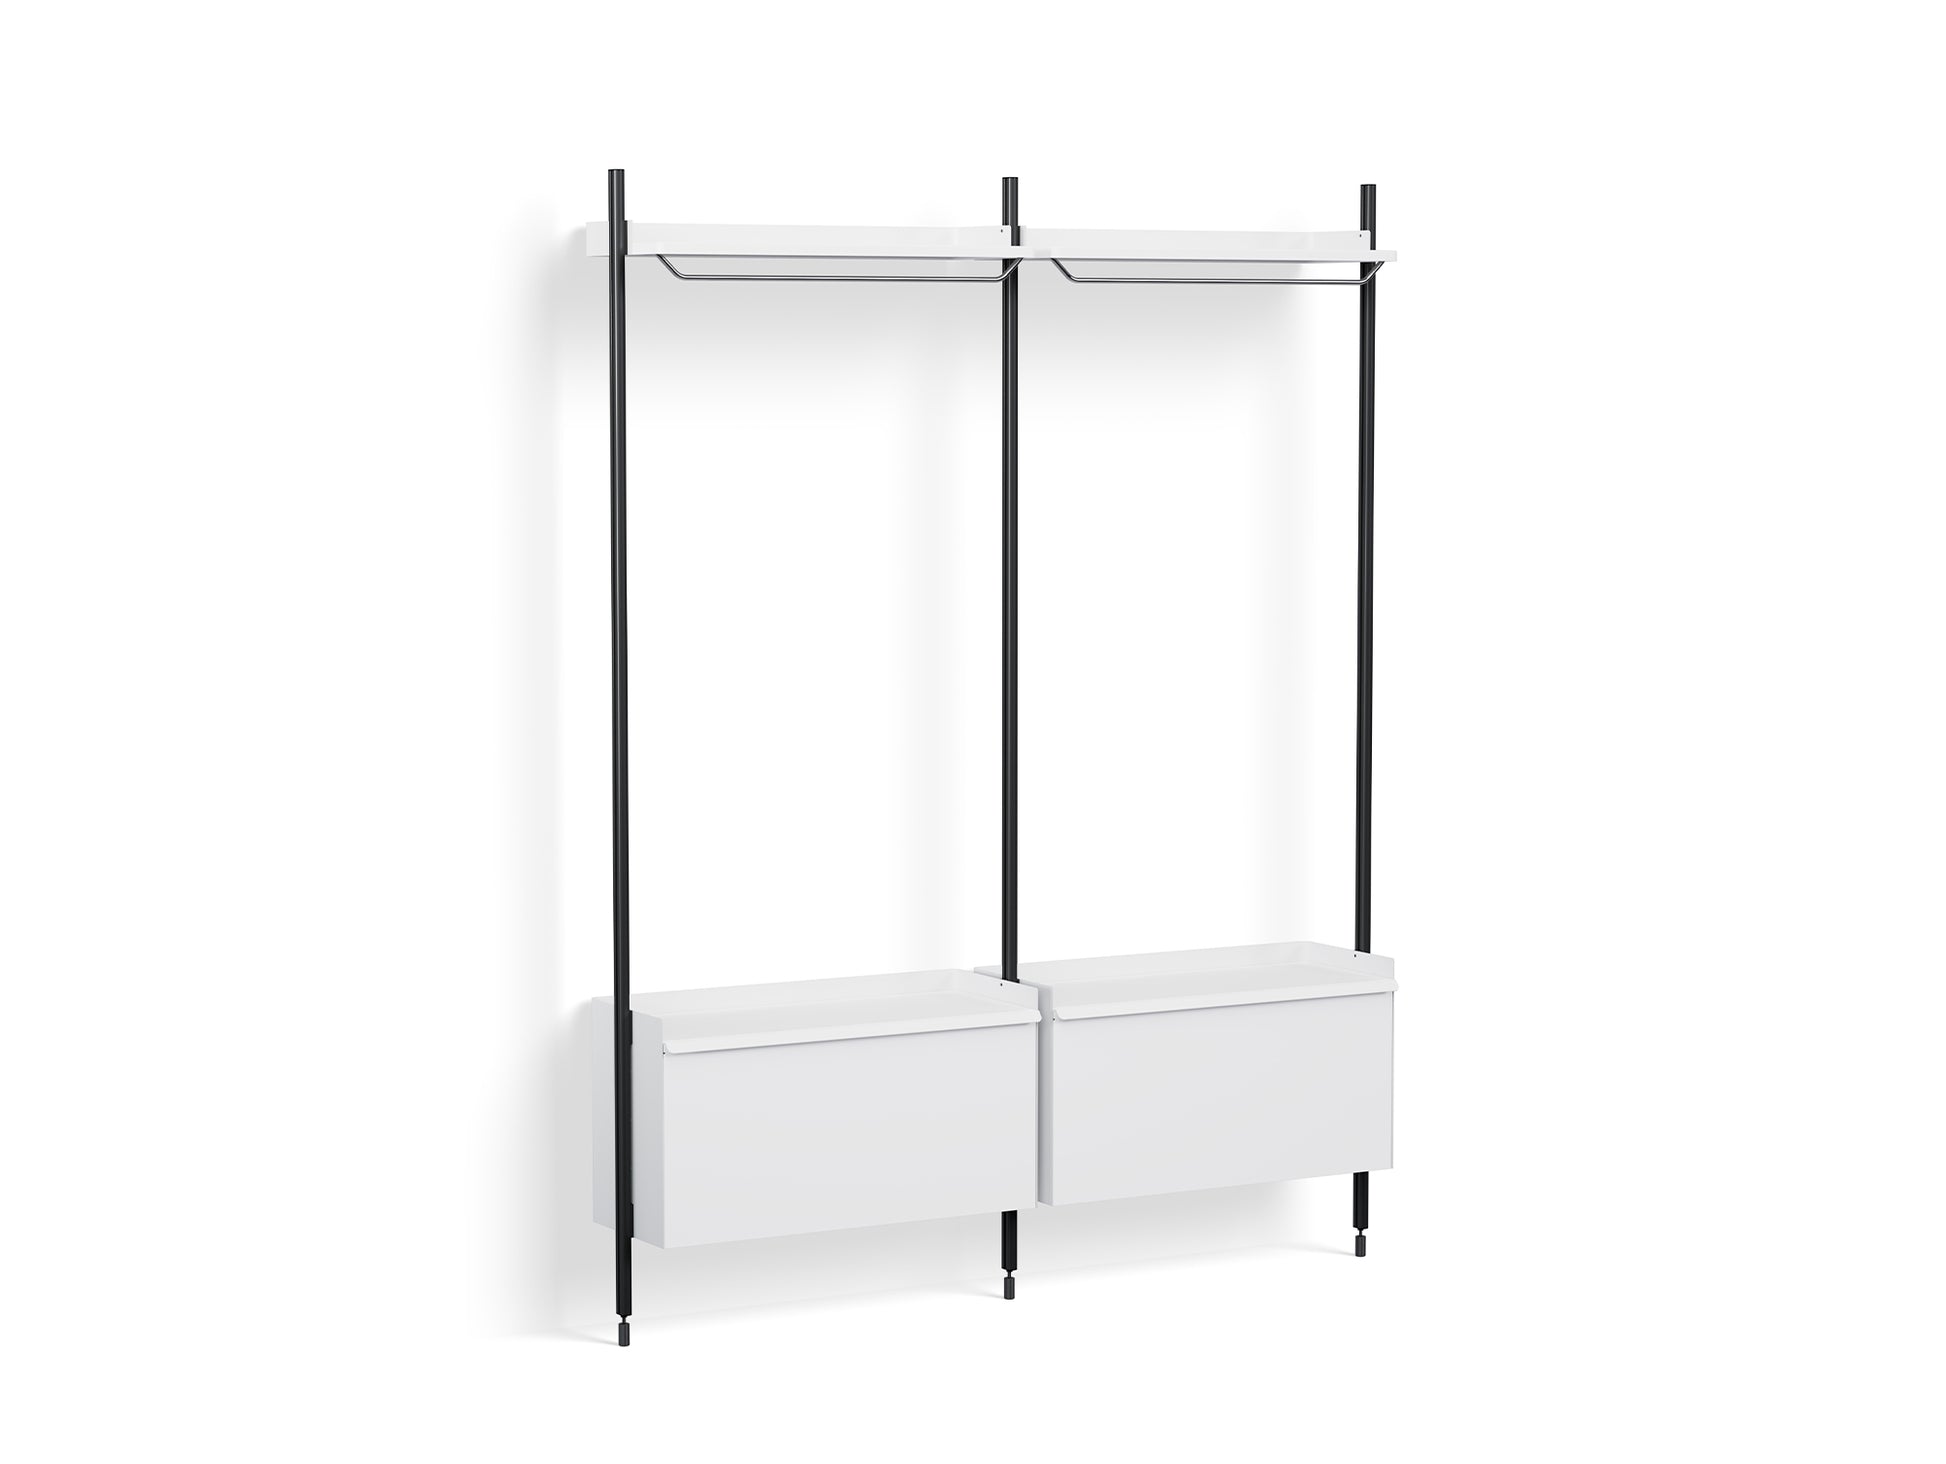 Pier System 1002 by HAY - Black Anodised Aluminium Uprights / PS white